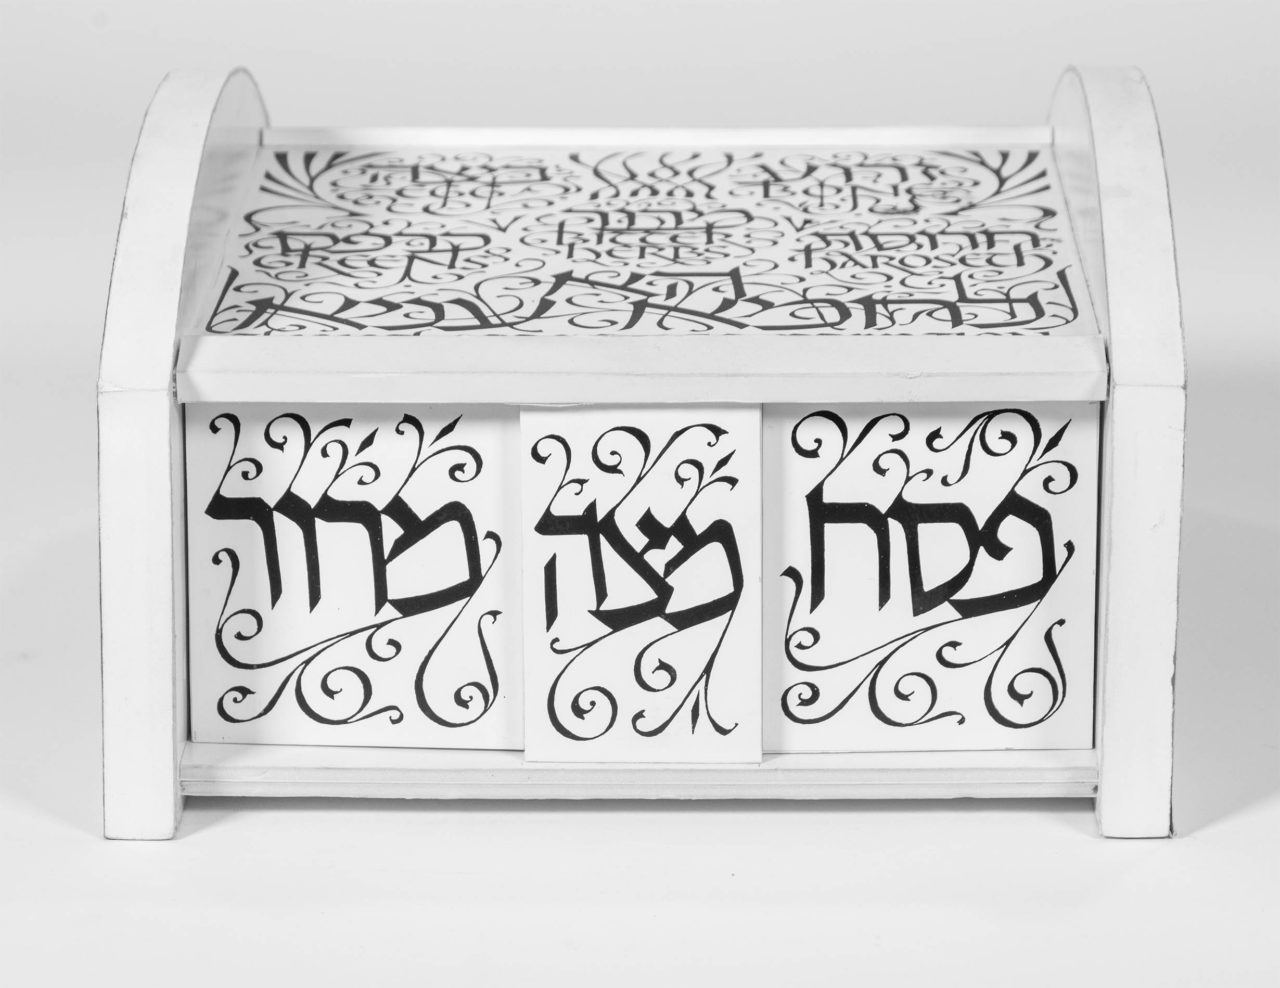 Model for a seder plate